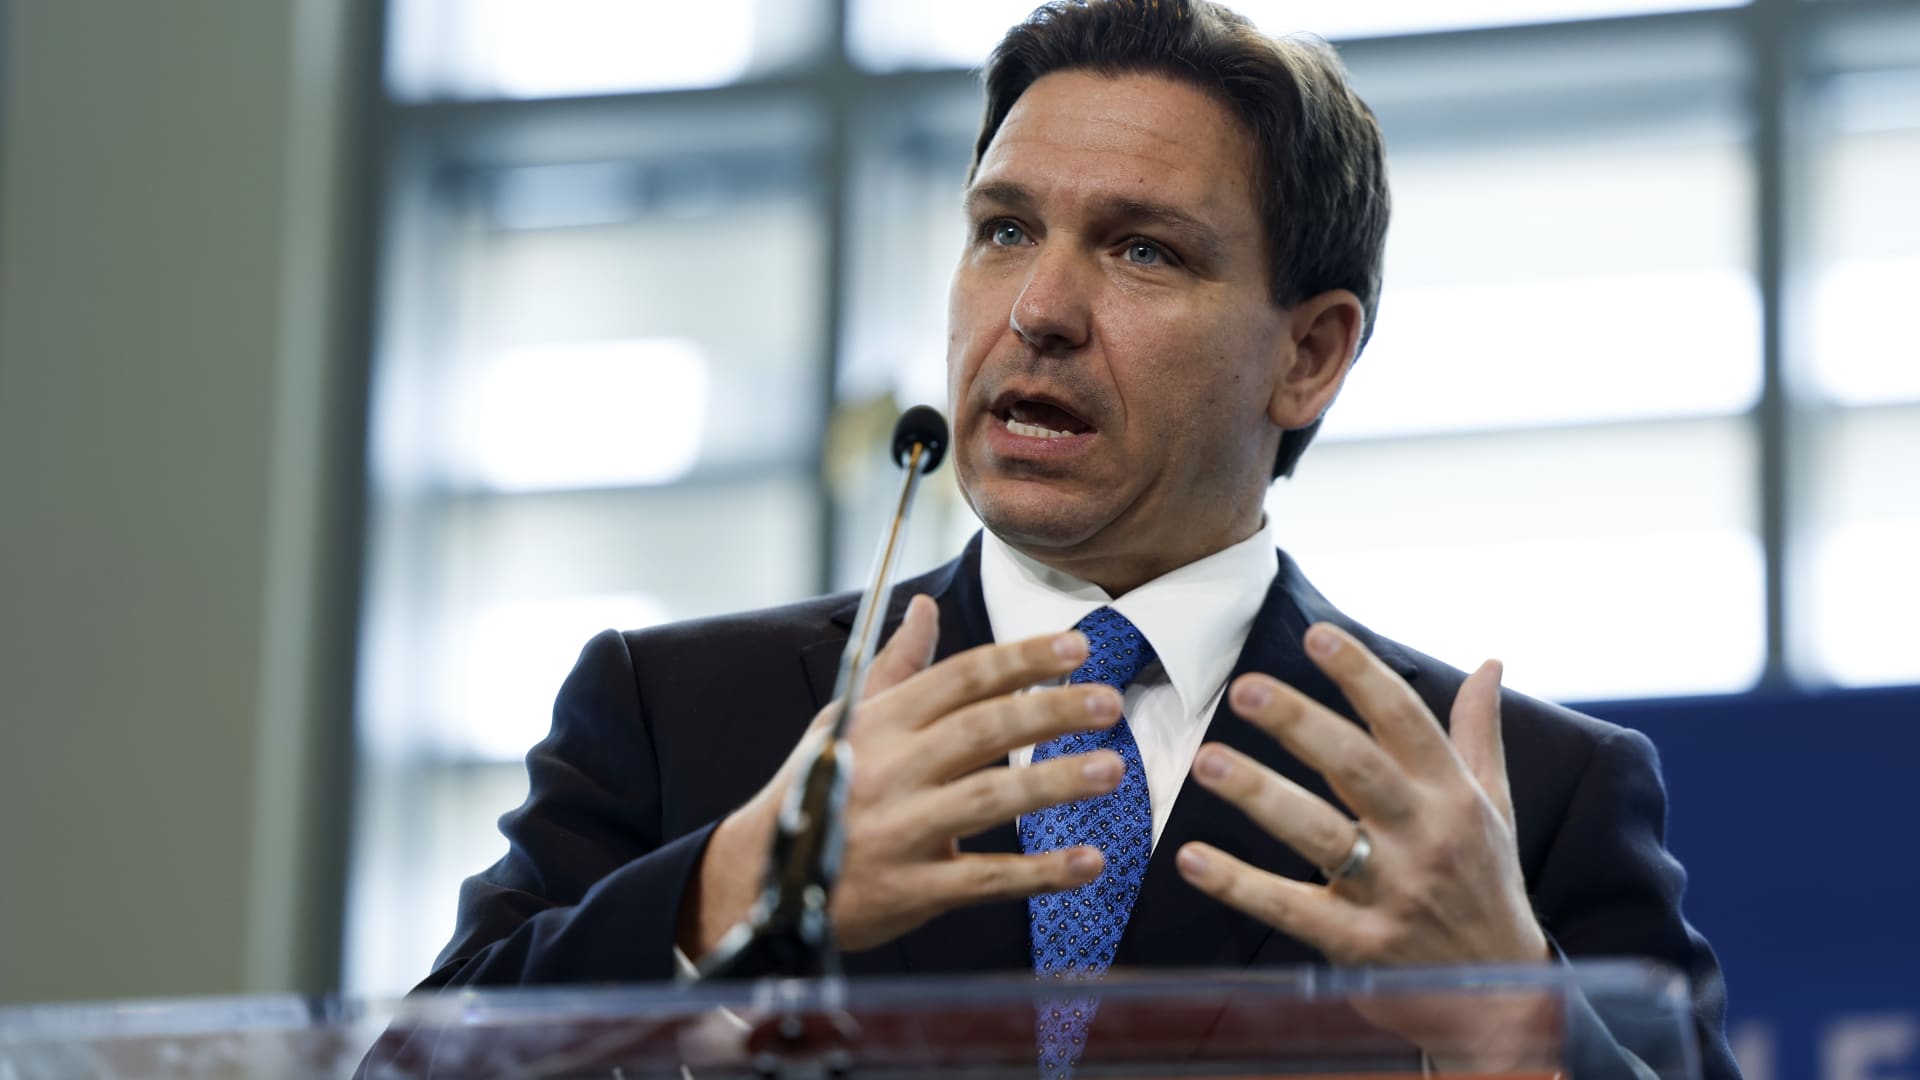 DeSantis moves to disqualify judge in Disney lawsuit over Florida tax district